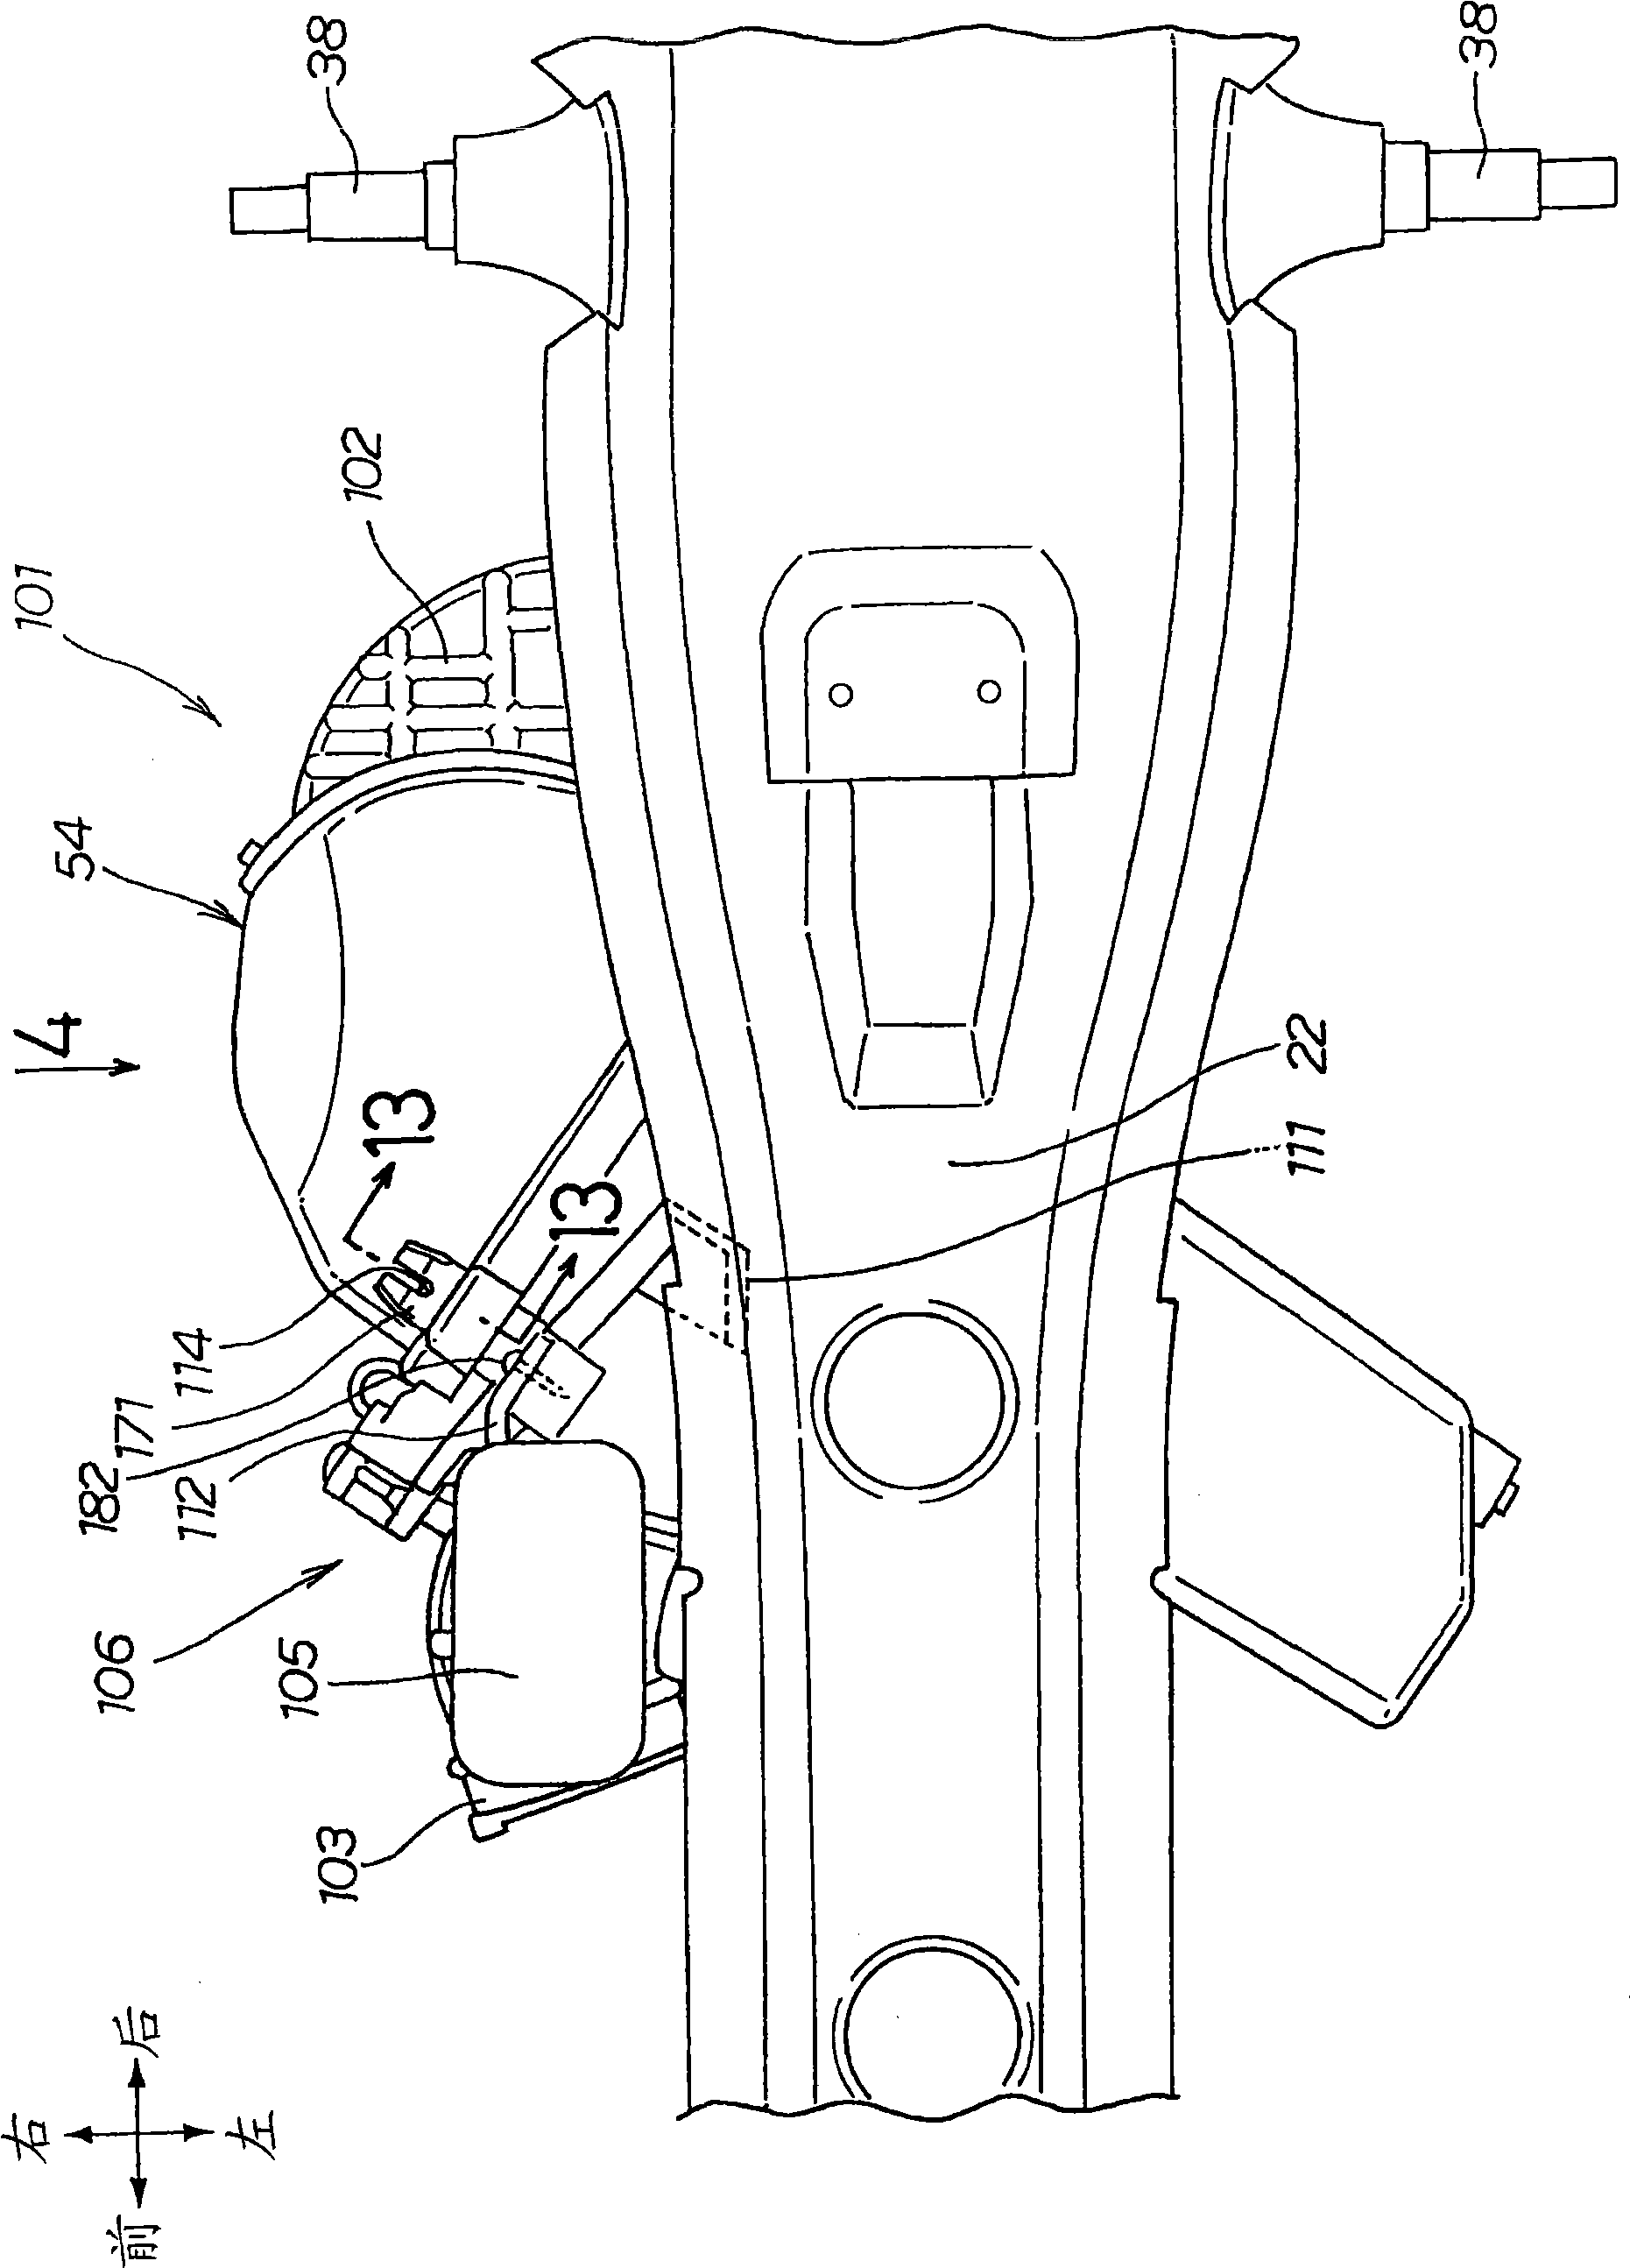 Air feeder structure of internal combustion engine